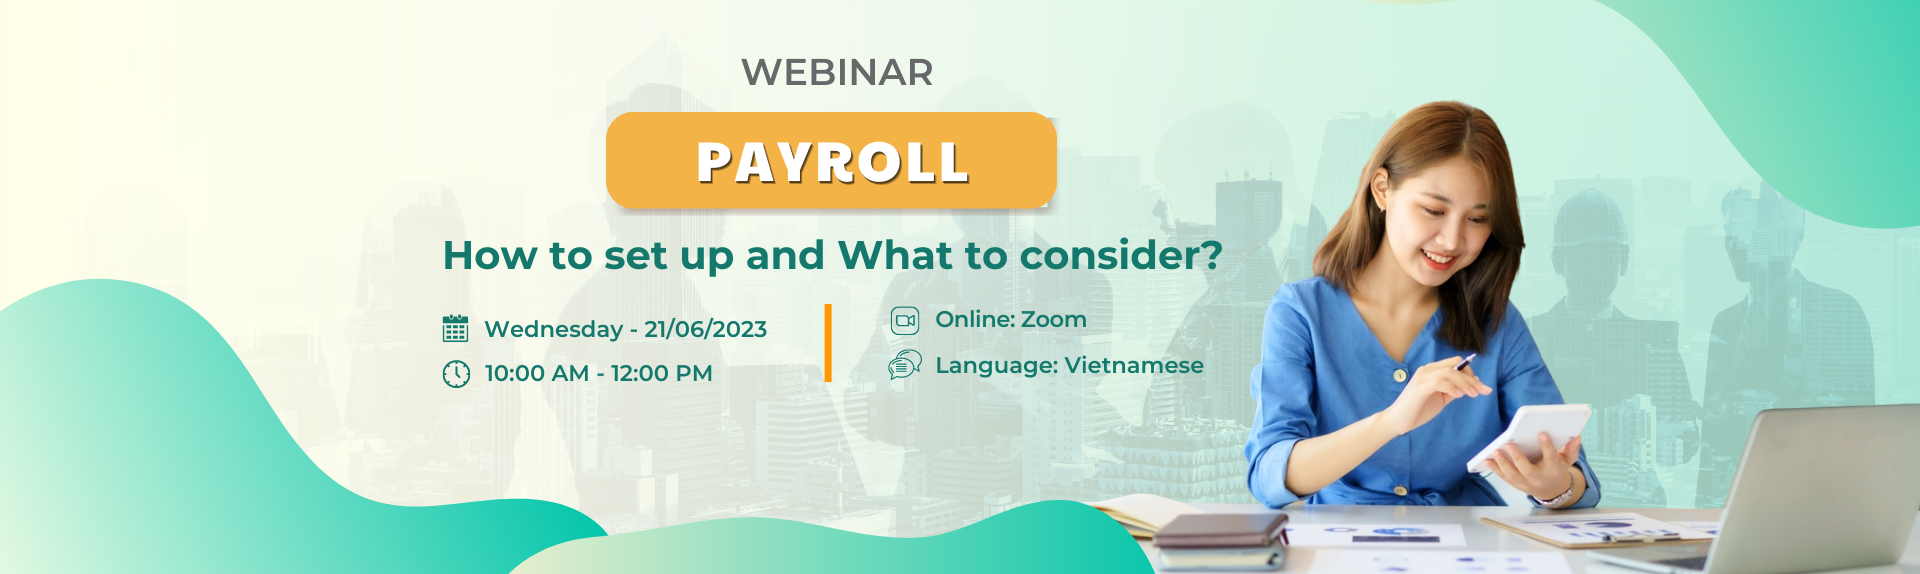 Webinar: Payroll - How To Set Up And What To Consider?